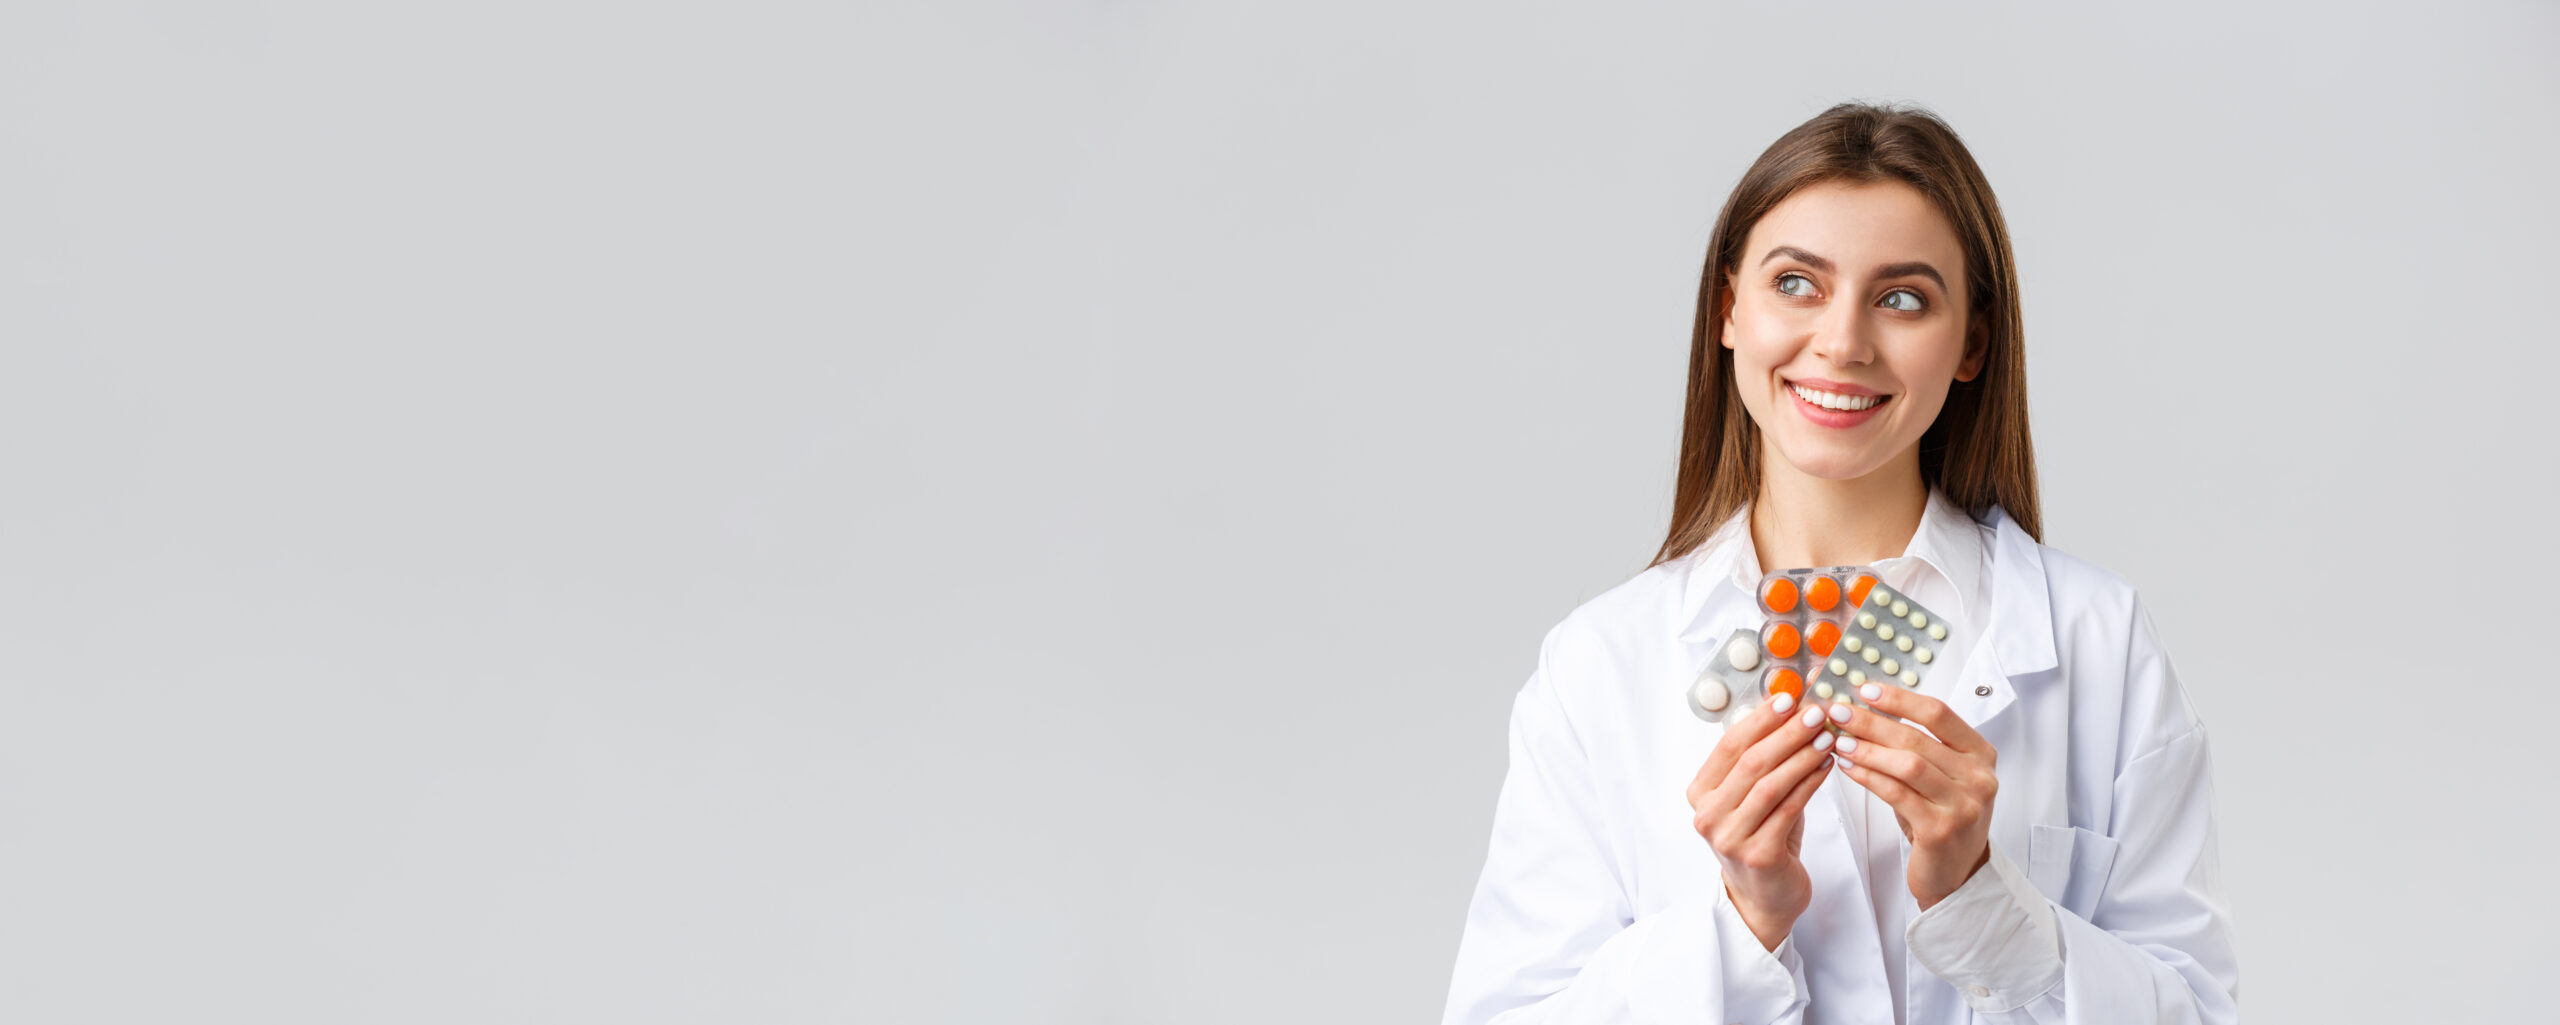 pharmacy-healthcare-workers-insurance-hospitals-concept-thoughtful-smiling-pleased-female-doctor-white-scrubs-look-away-thinking-holding-medicine-pills-vitamins